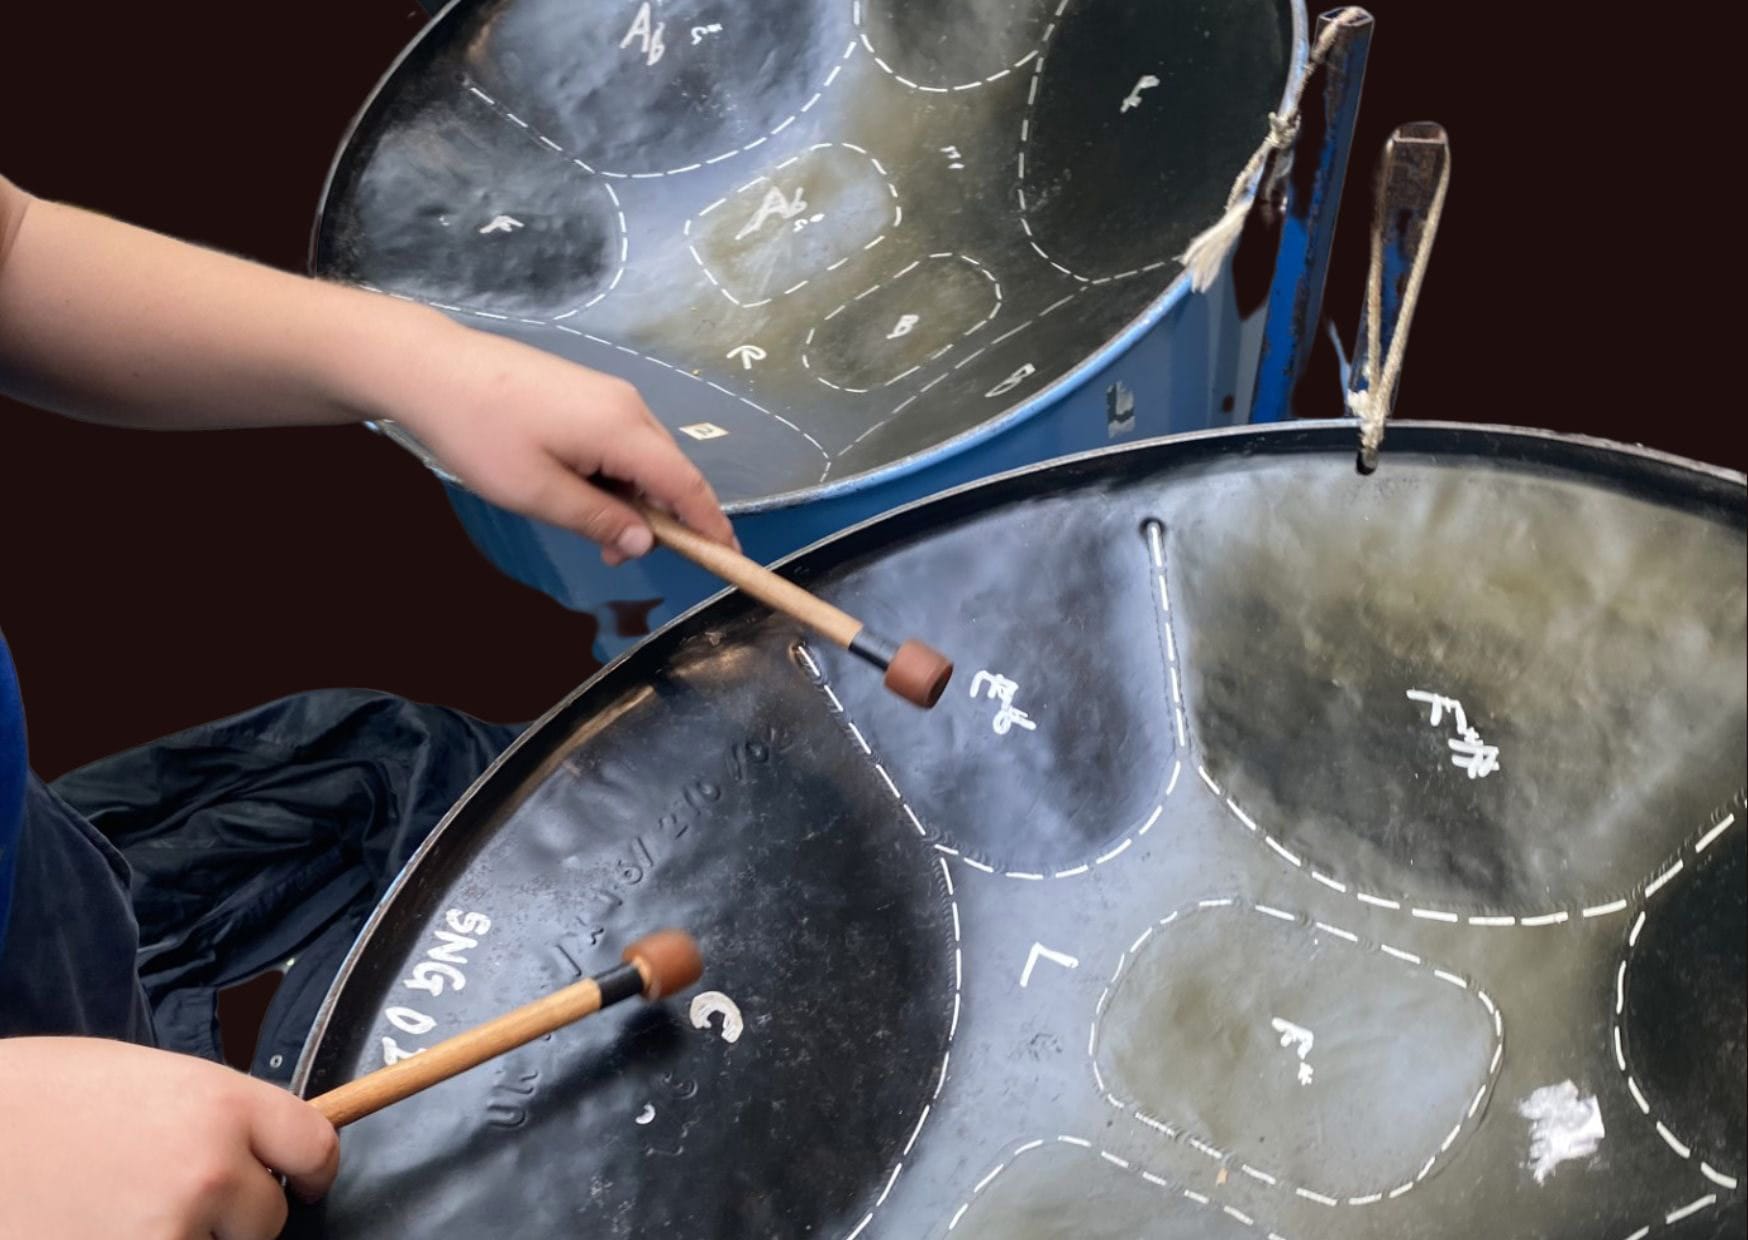 A close up of two steel pans, they are being played by a person whose hands are visible holding wooden sticks.